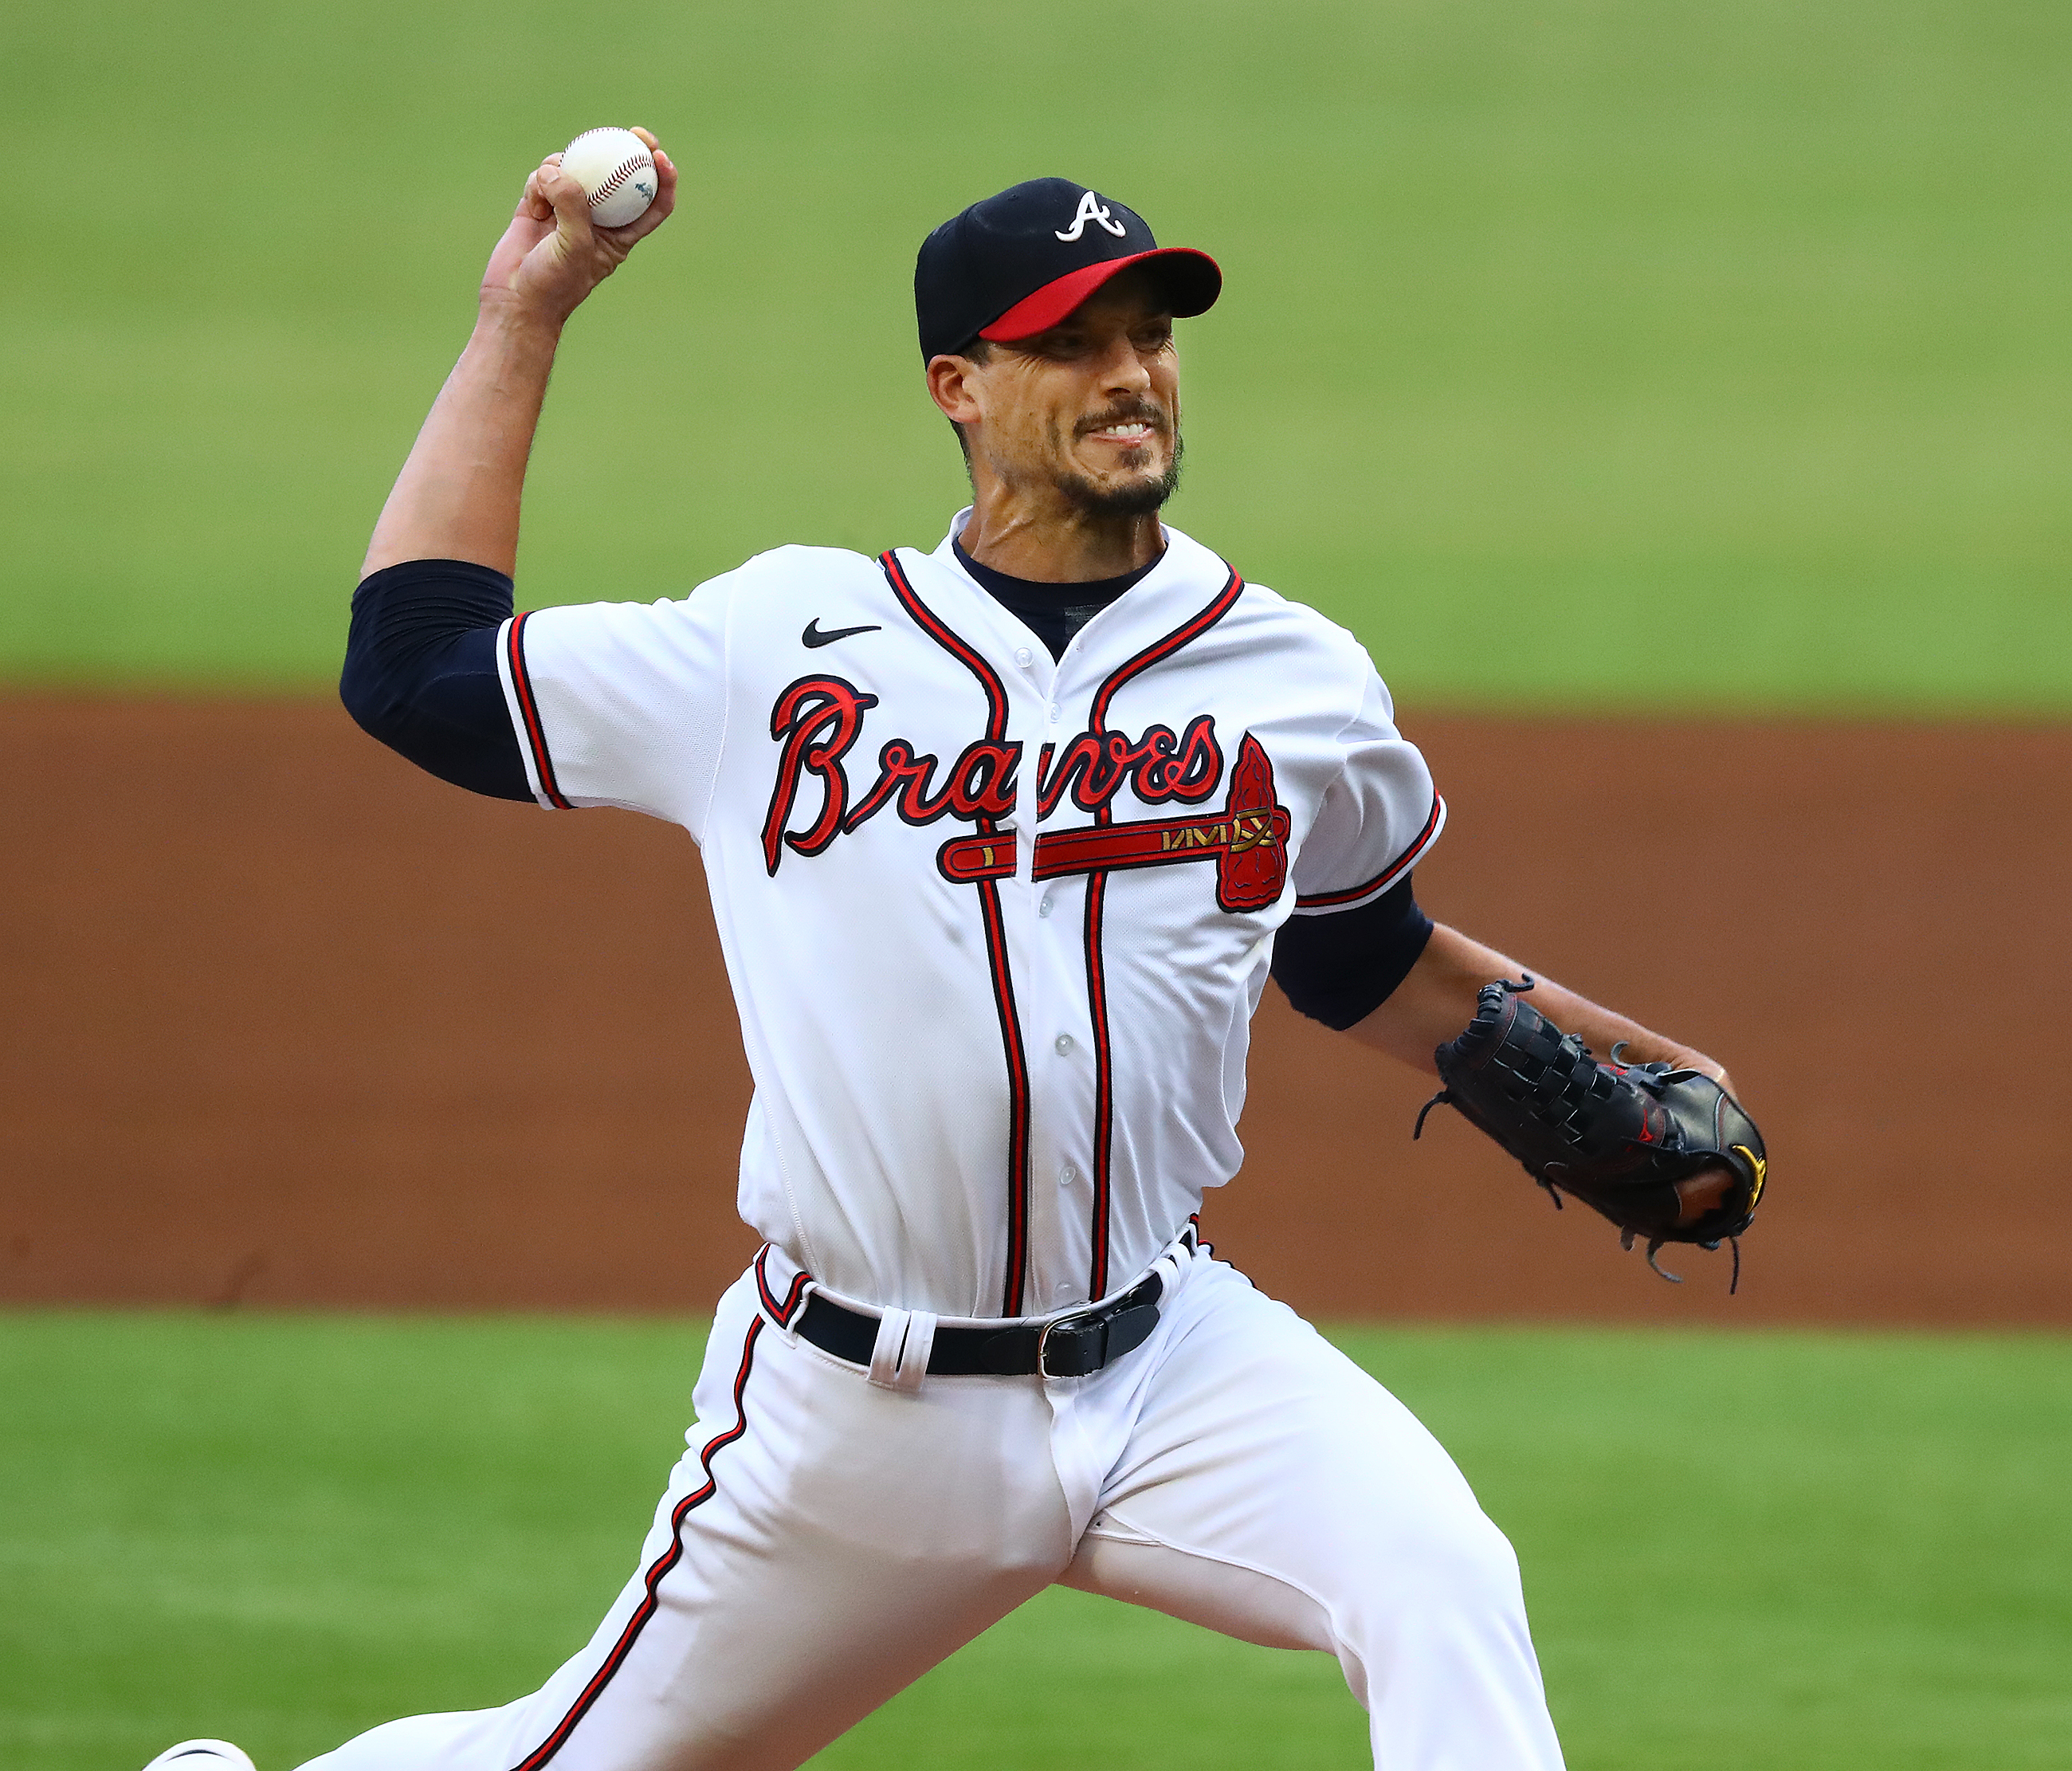 Braves Nation: The ageless Charlie Morton does it again